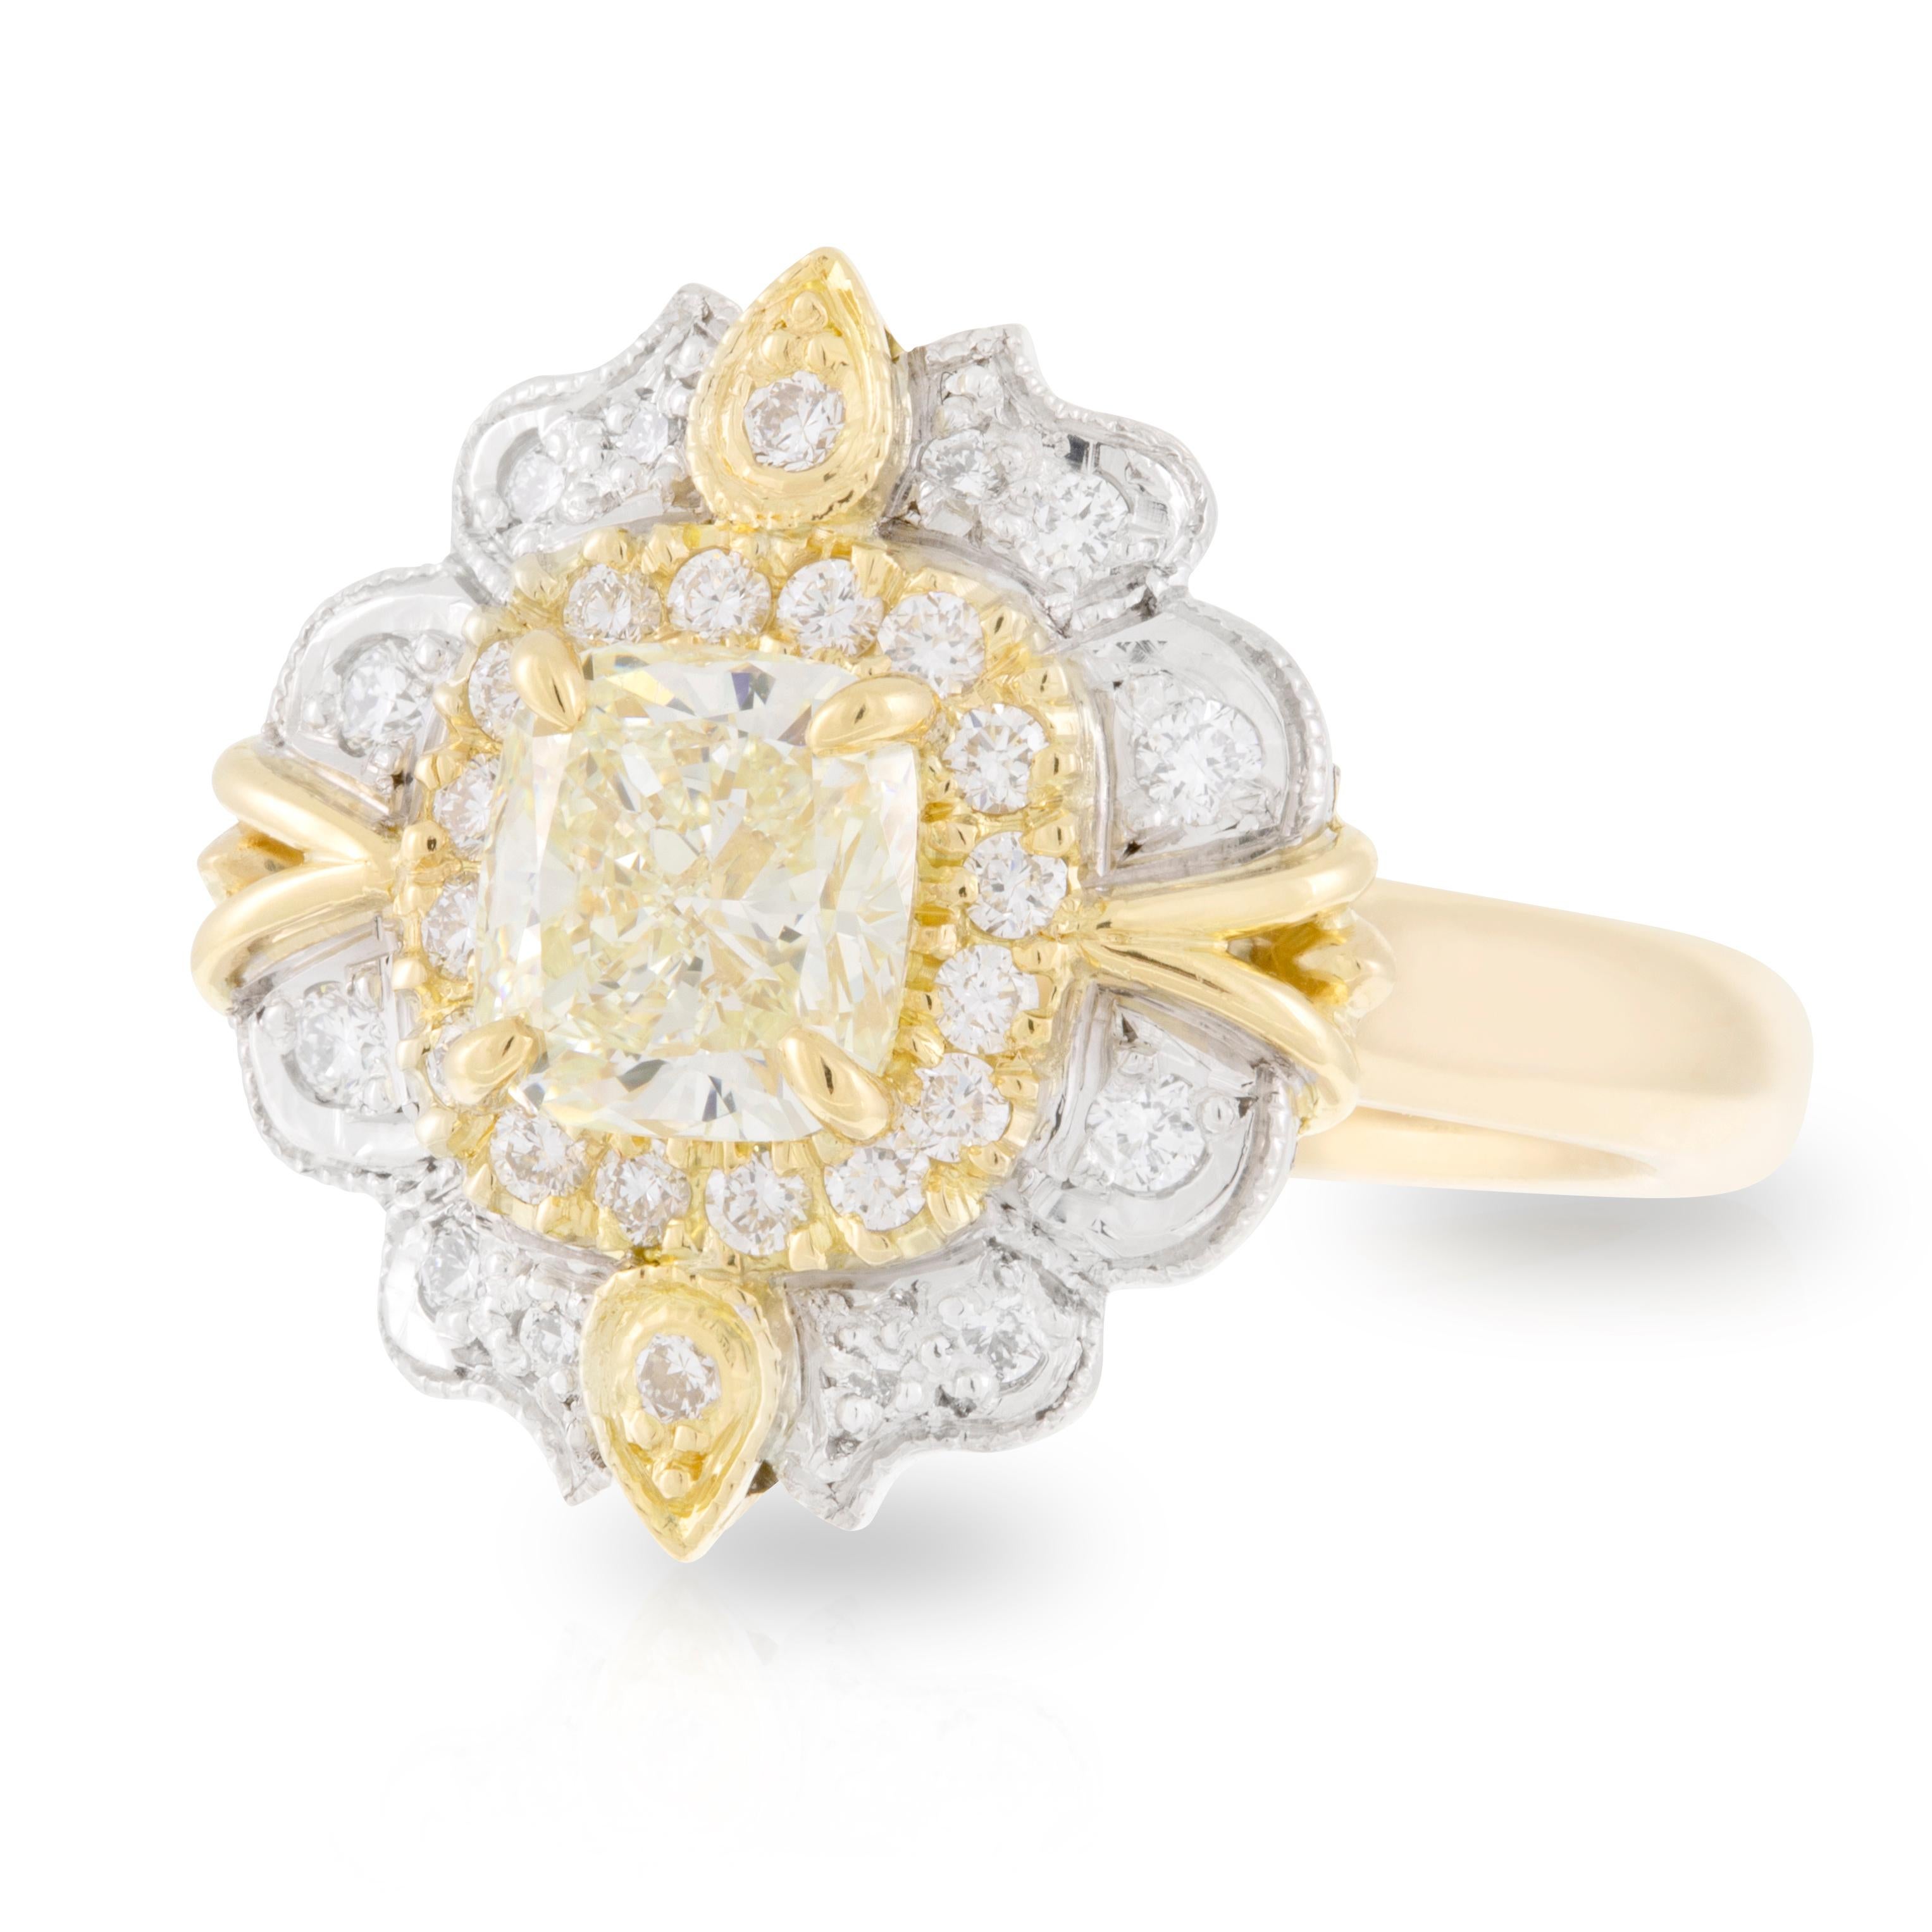 Handmade 18ct Yellow and White Gold 1.03ct Cushion Cut Yellow Diamond Centre with an Art Deco Style Diamond Halo Engagement Ring. TDW 1.28ct.
